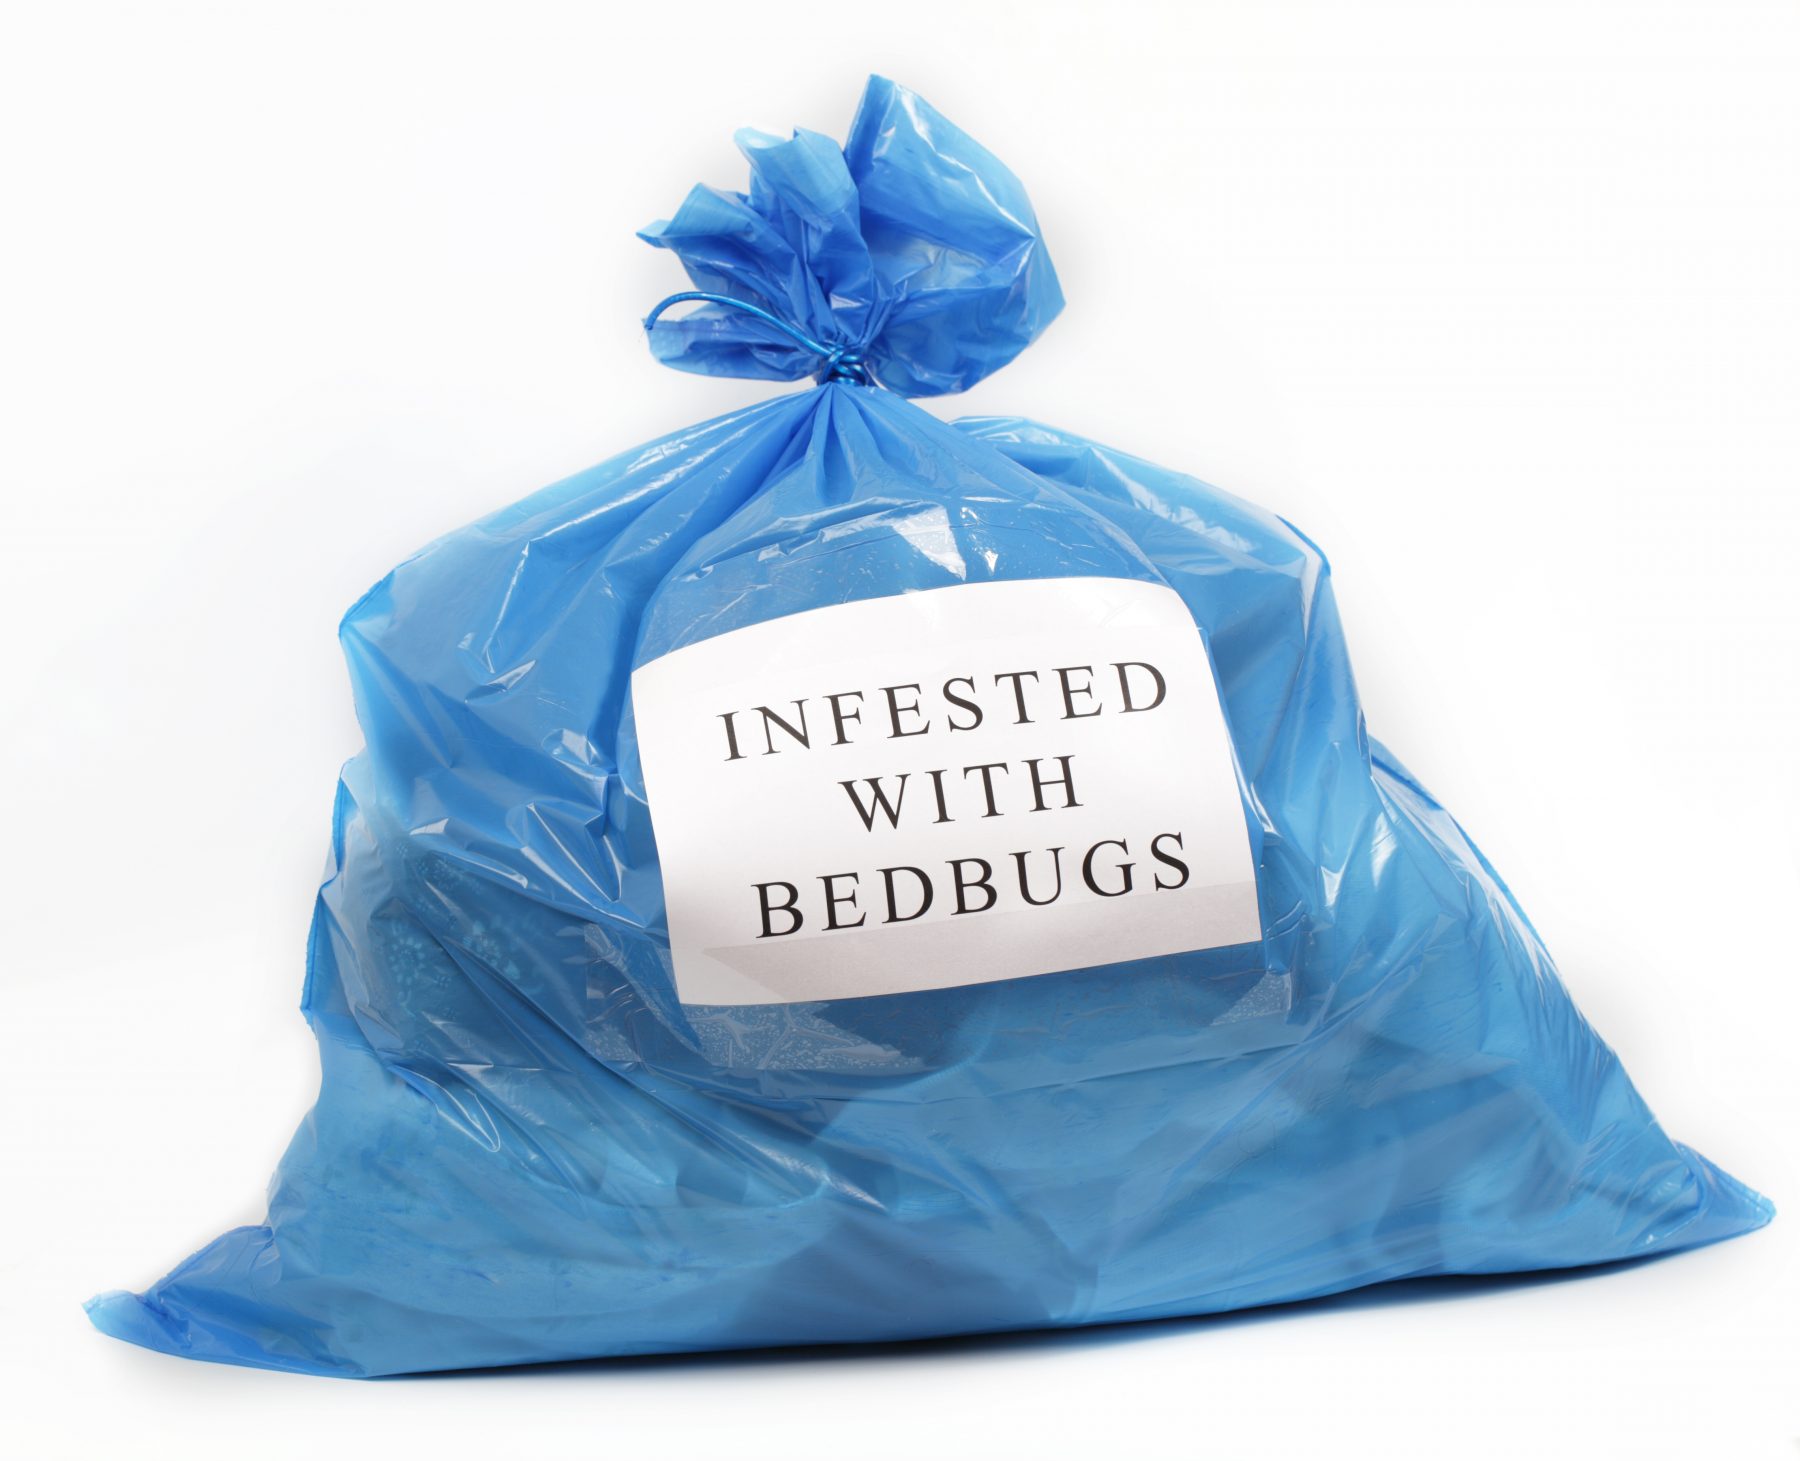 Blue plastic bag with paper sign "Infested with Bed Bugs"